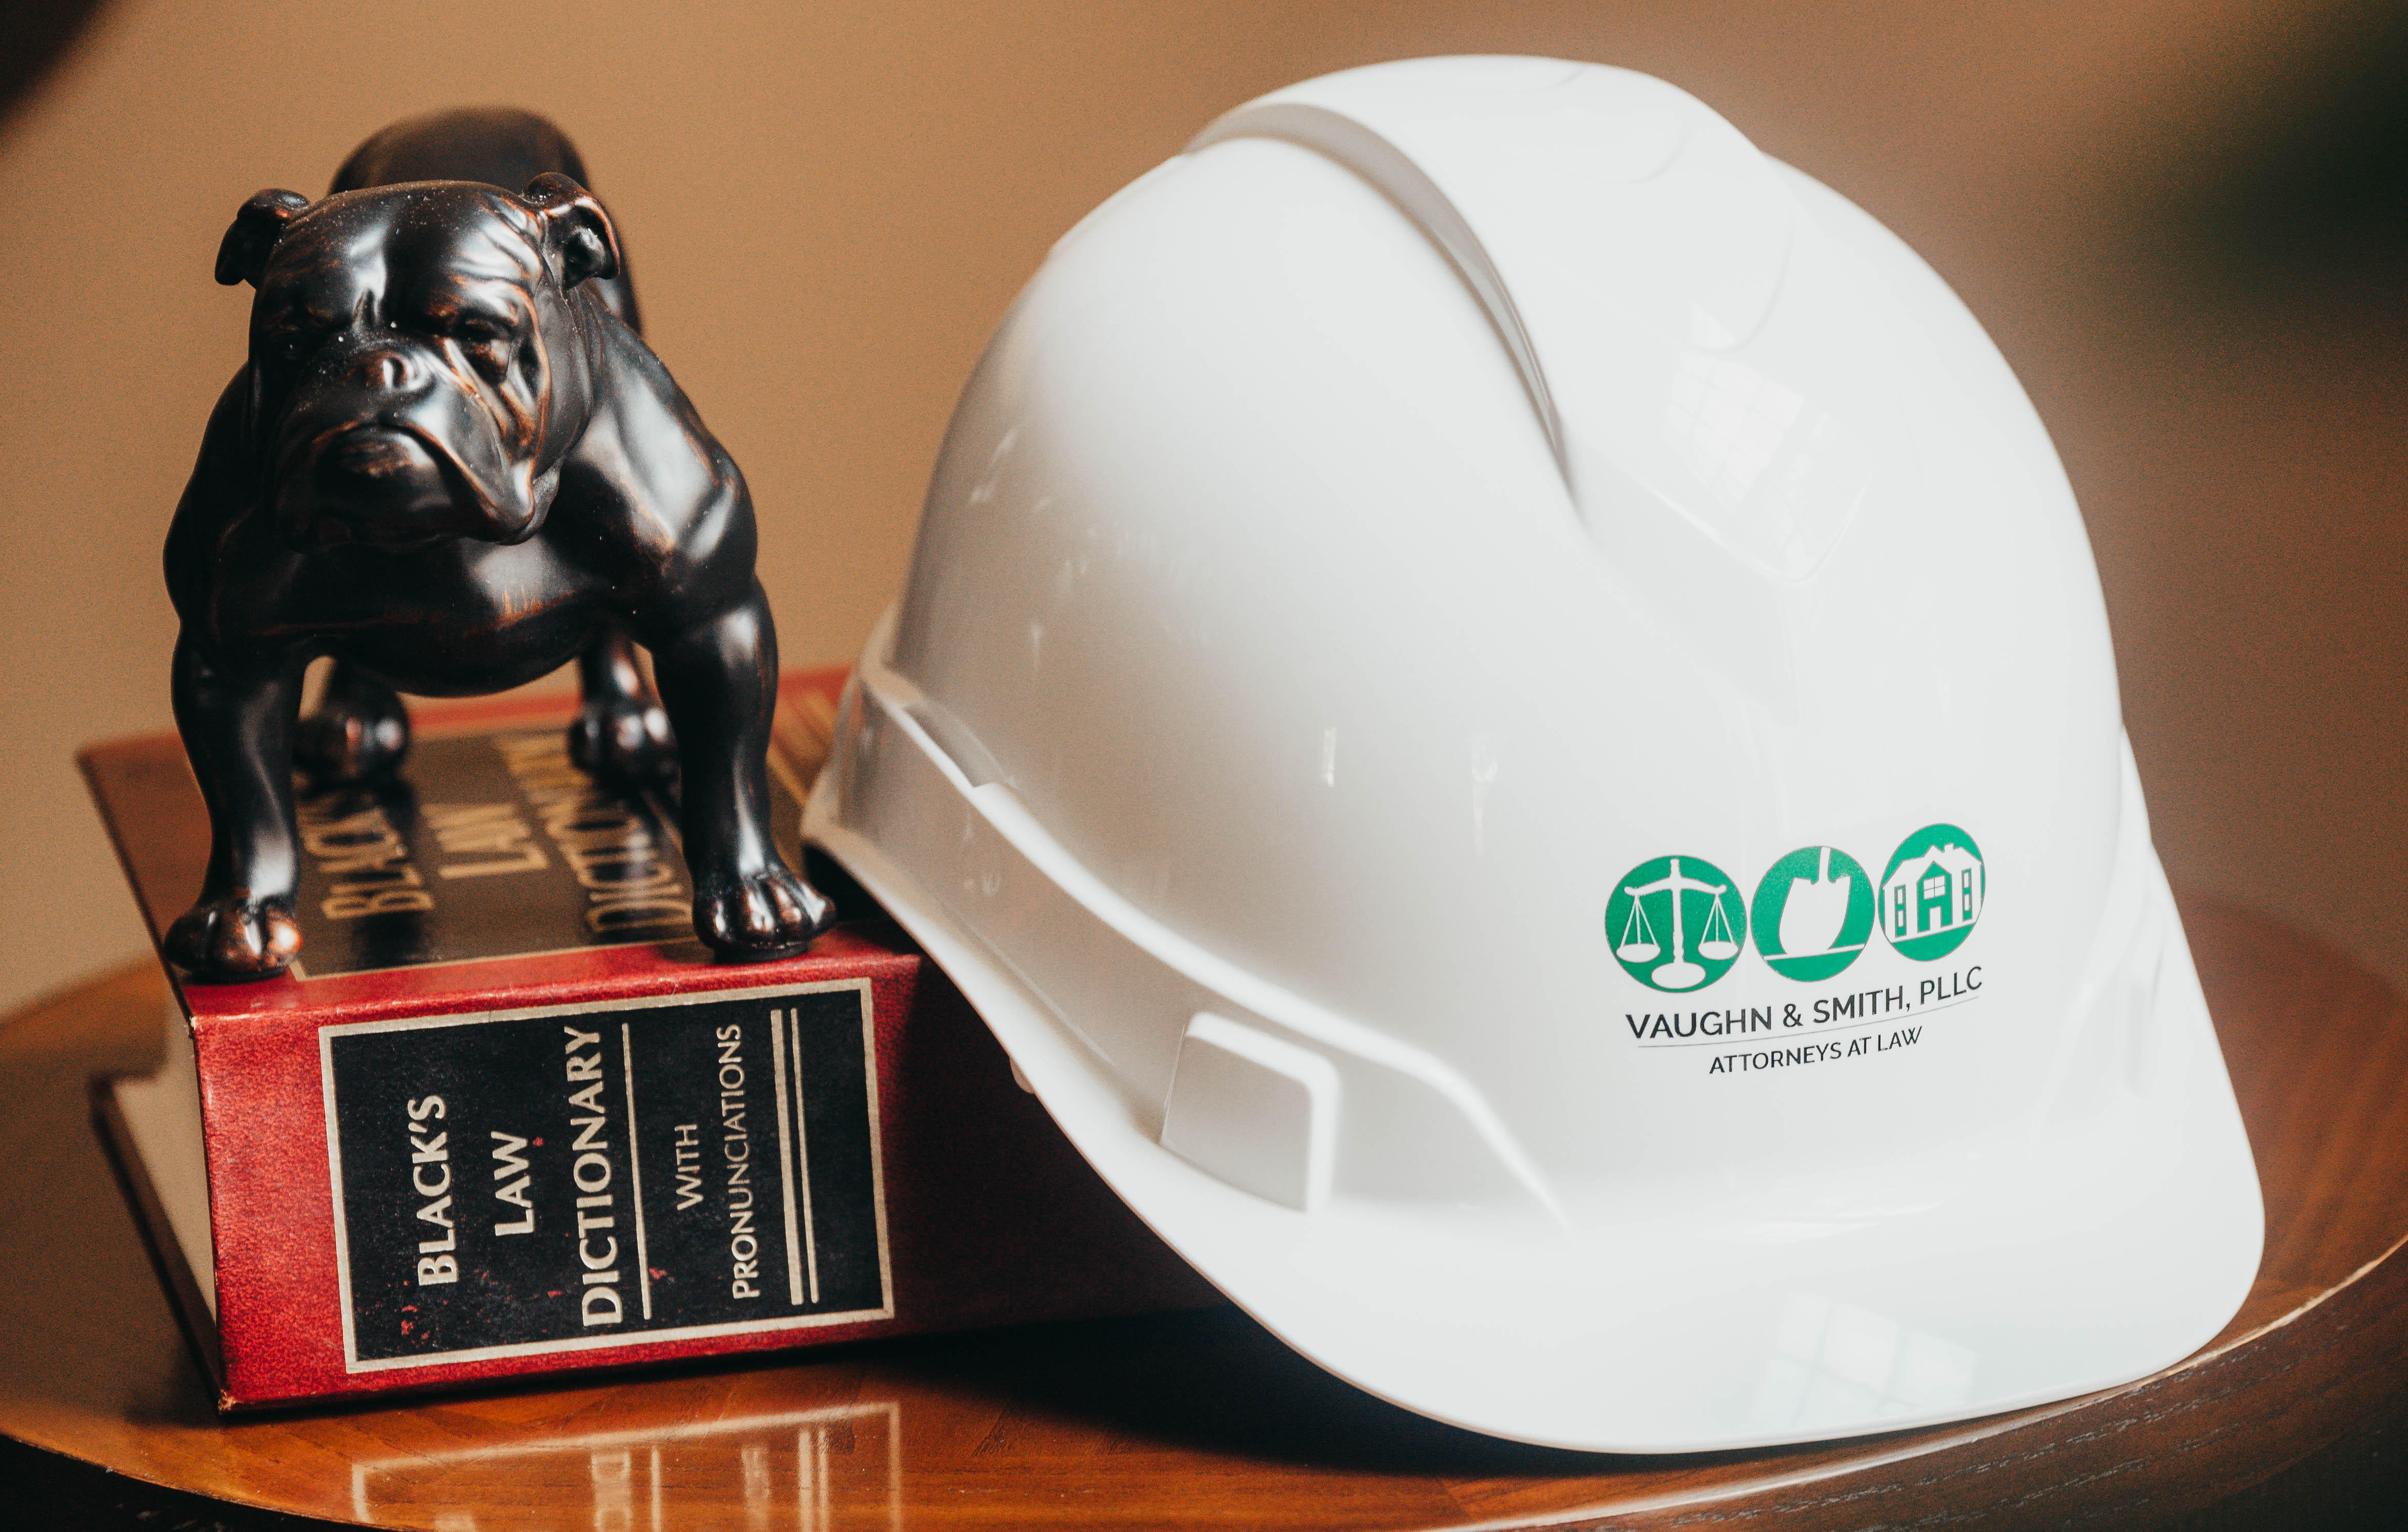 We offer highly effective representation in Construction Law Disputes.